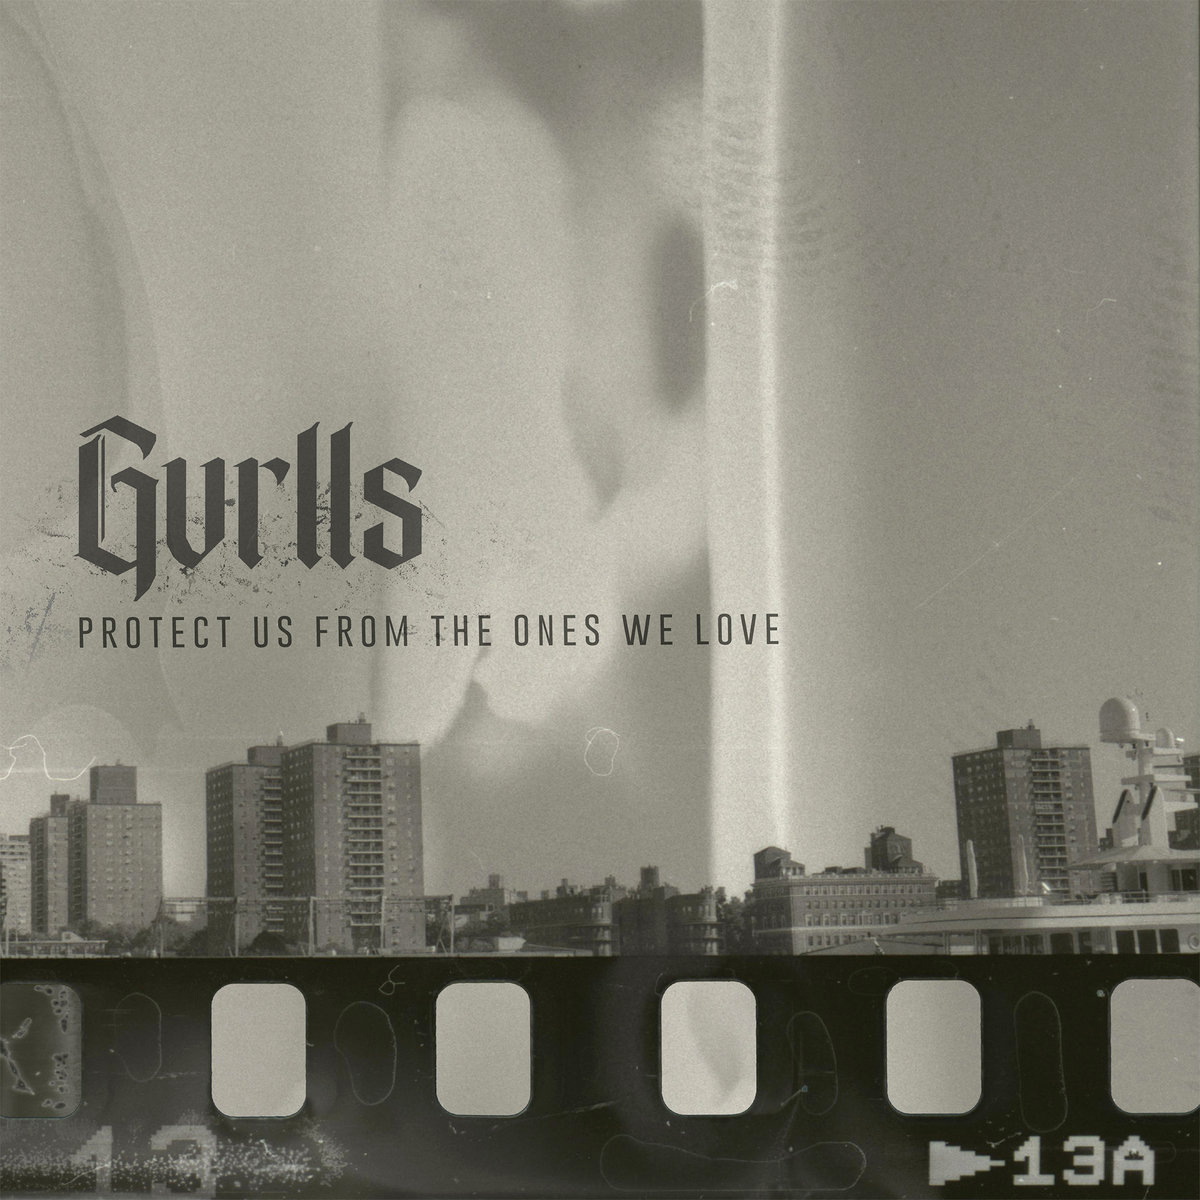 Gvrlls - Protect Us From The Ones We Love (2015) Album Info